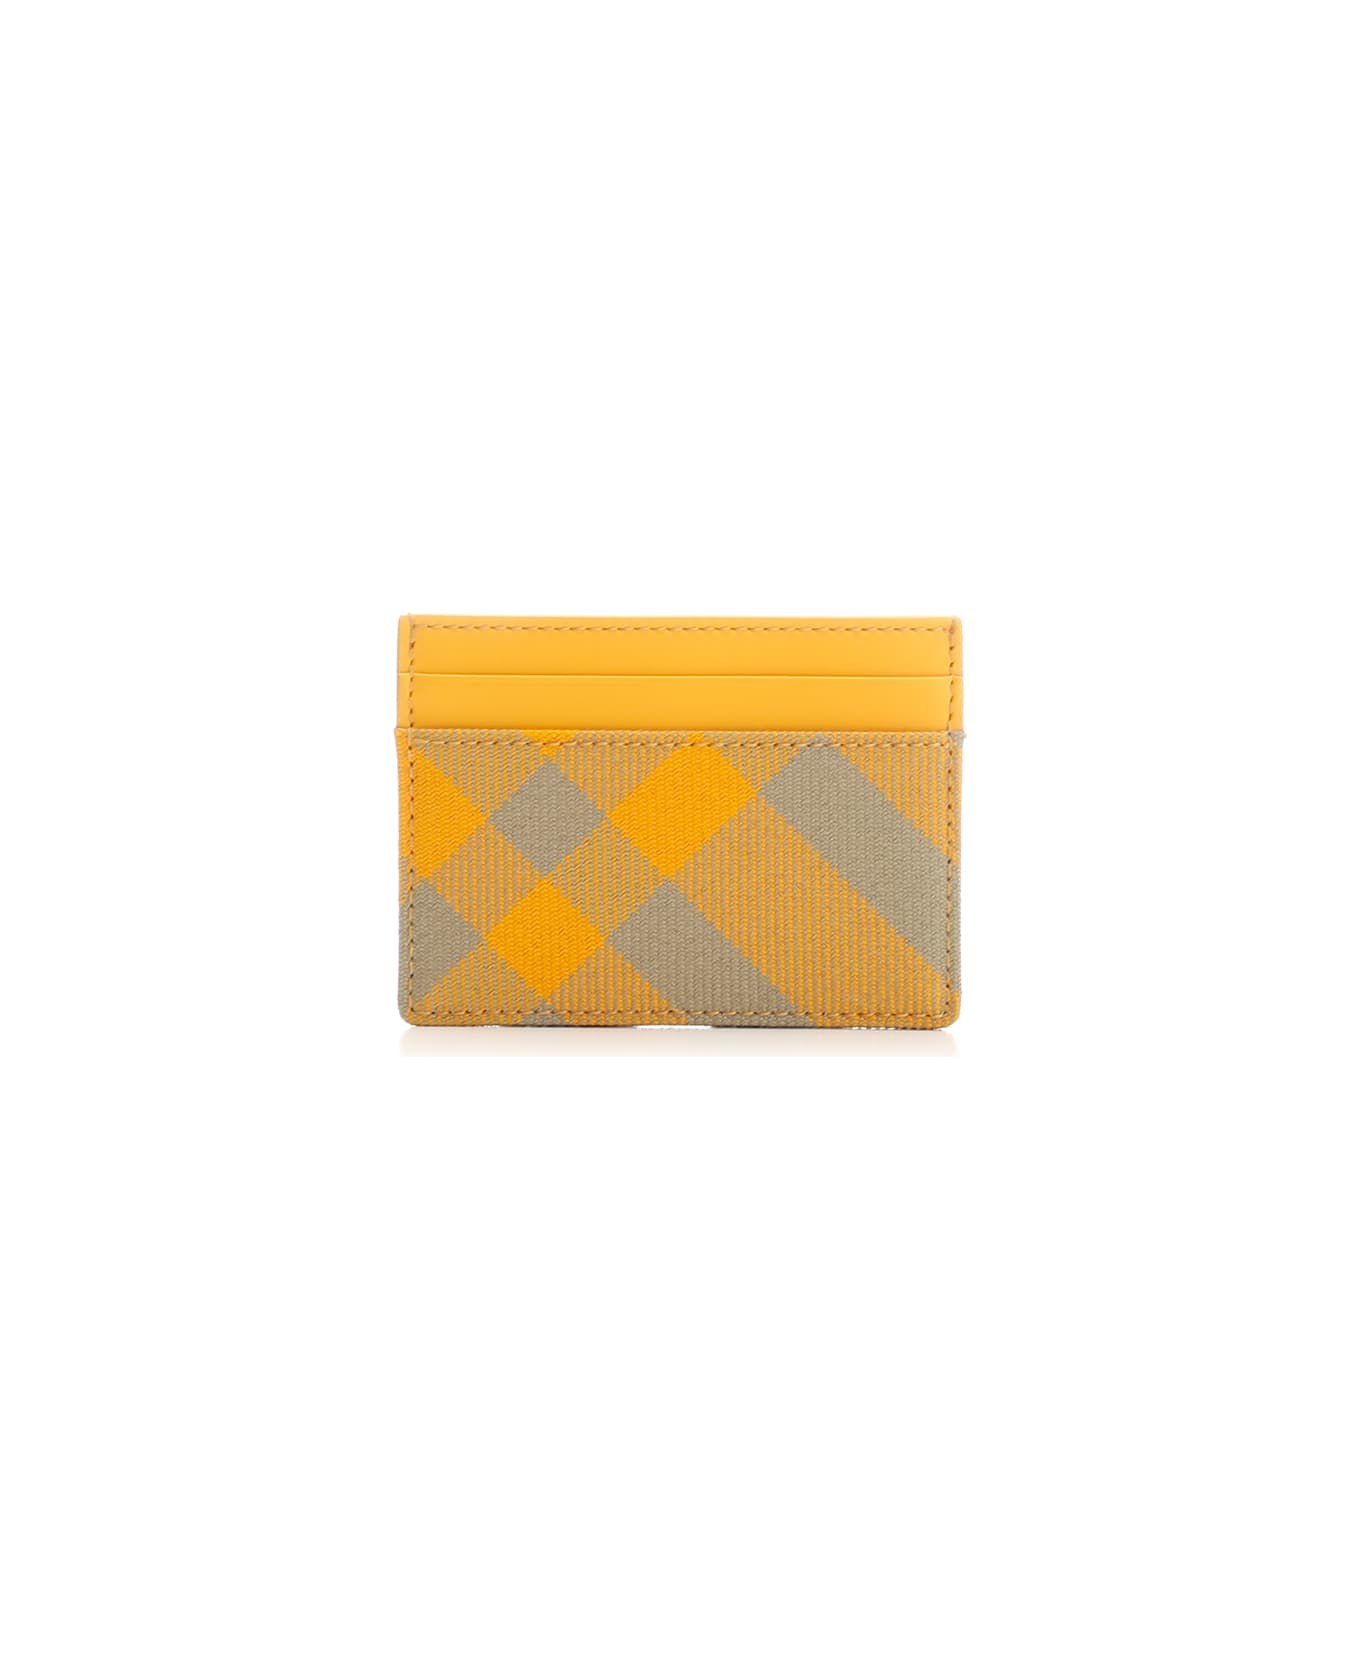 Burberry Wool And Leather Card Holder - Multicolor